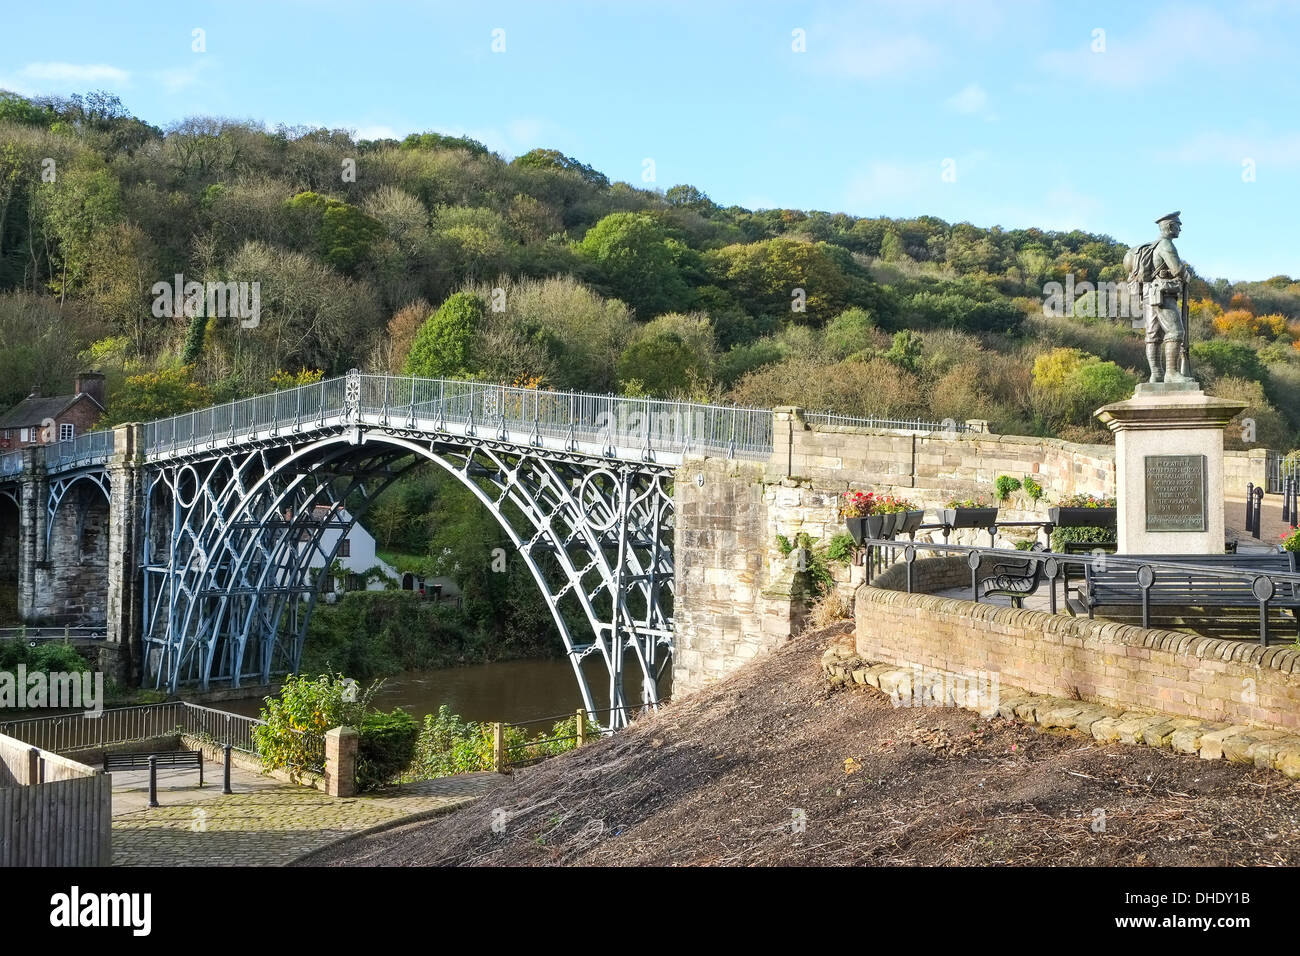 The bridge known as Ironbridge in the village of Ironbridge in Shropshire, UK. The bridge built in 1779 over the River Severn Stock Photo